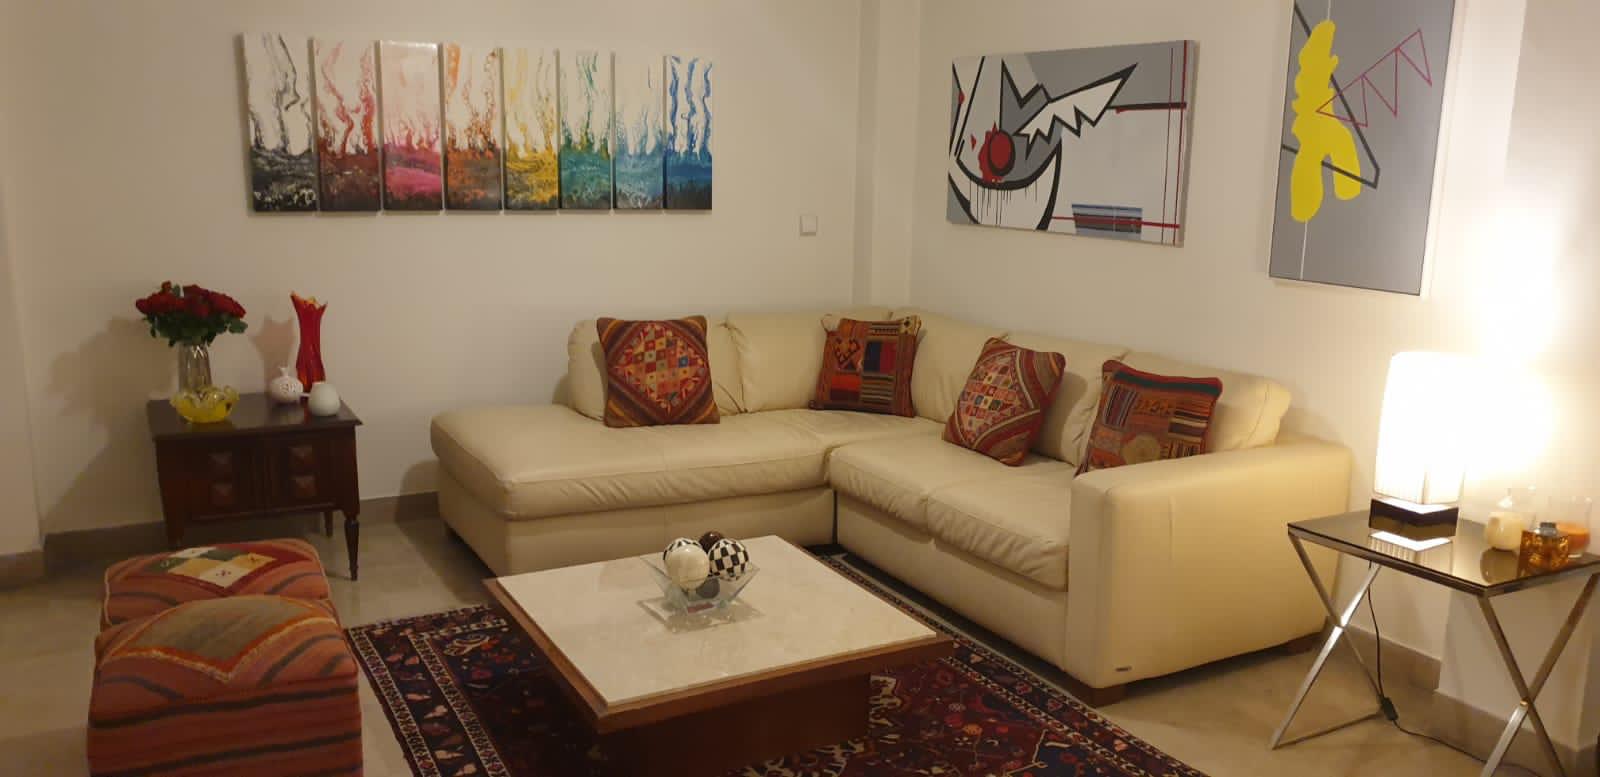 This Fully Furnished Flat for Renting in Darrous Tehran